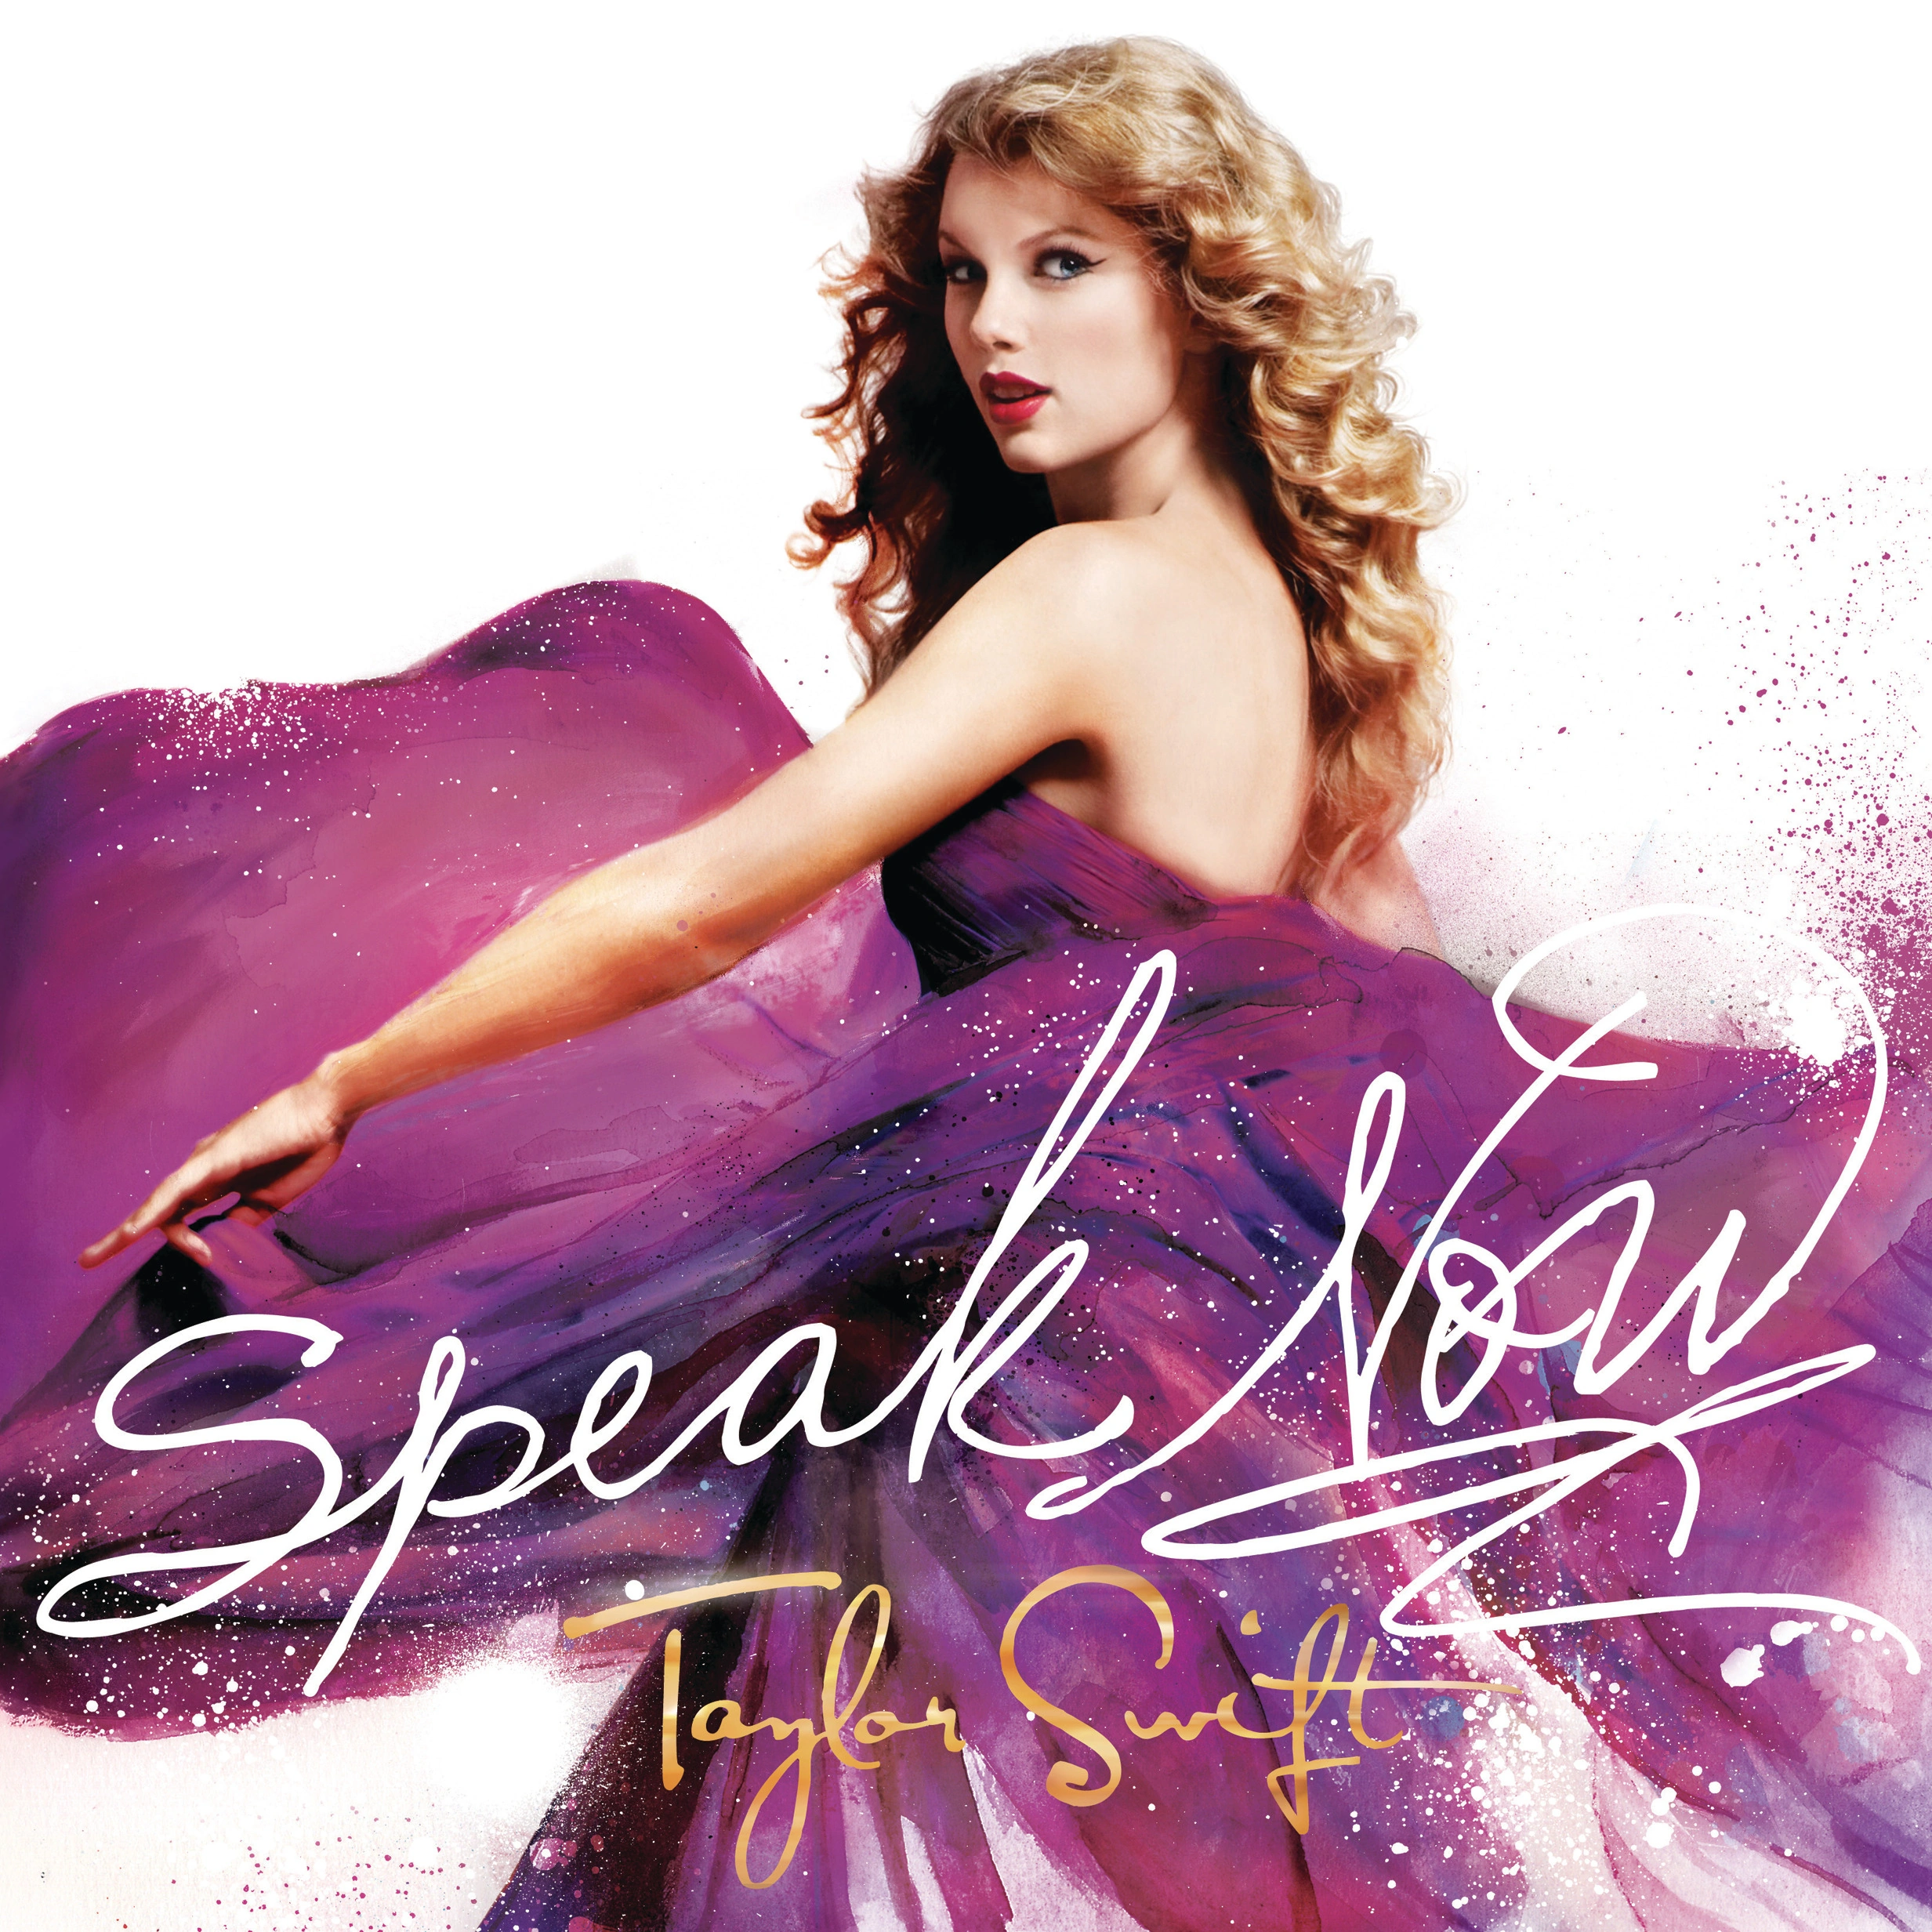 Taylor Swift re-releases 'Speak Now' album, makes controversial change to  song